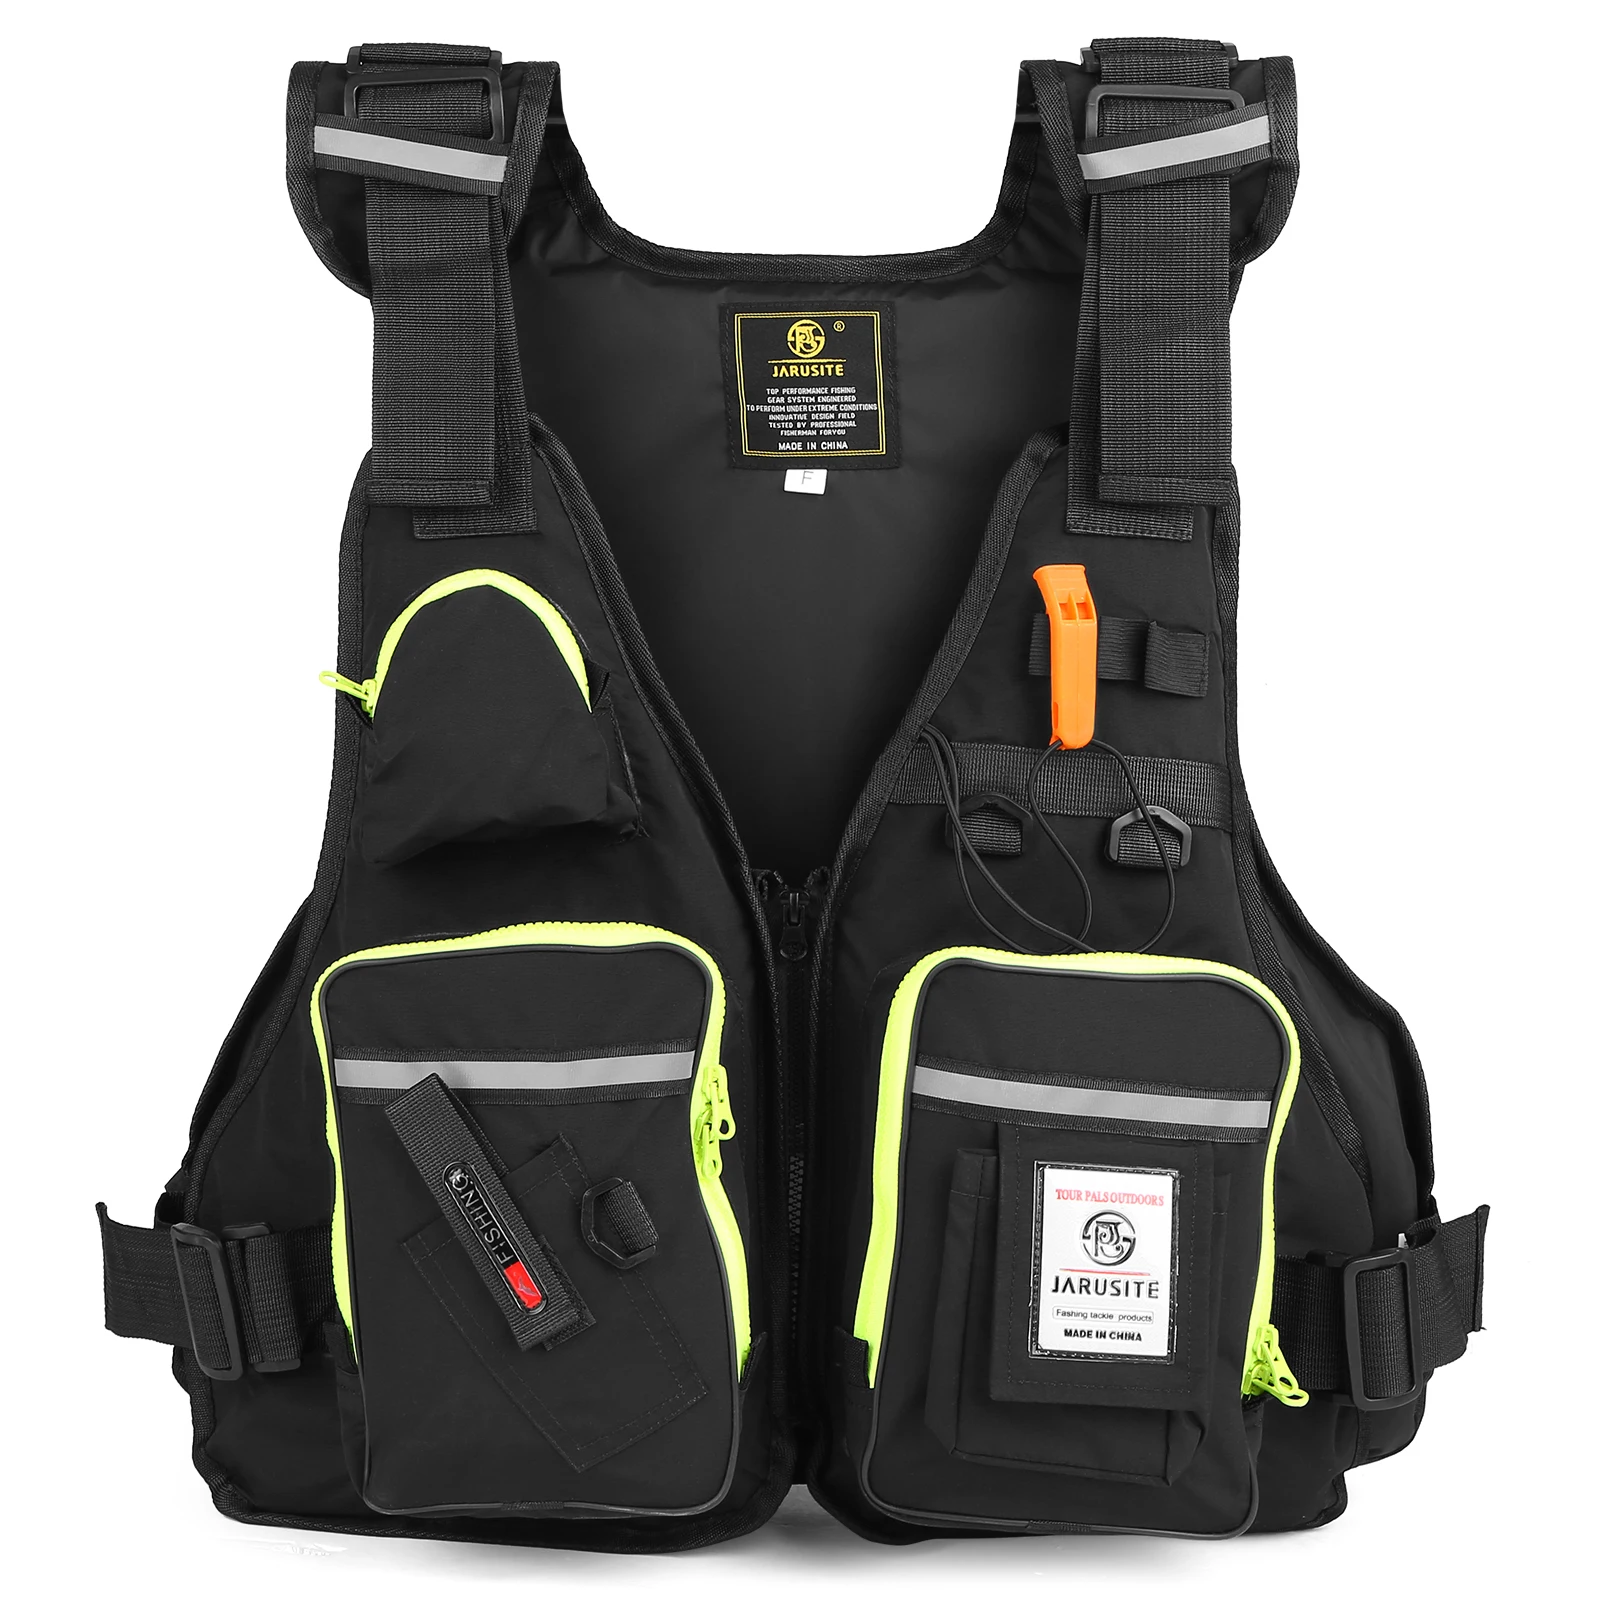 

JARUSITE Life Jacket Multi-Pockets Fly Fishing Buoyancy Vest with Water Bottle Holder for Kayaking Sailing Boating Water Sports